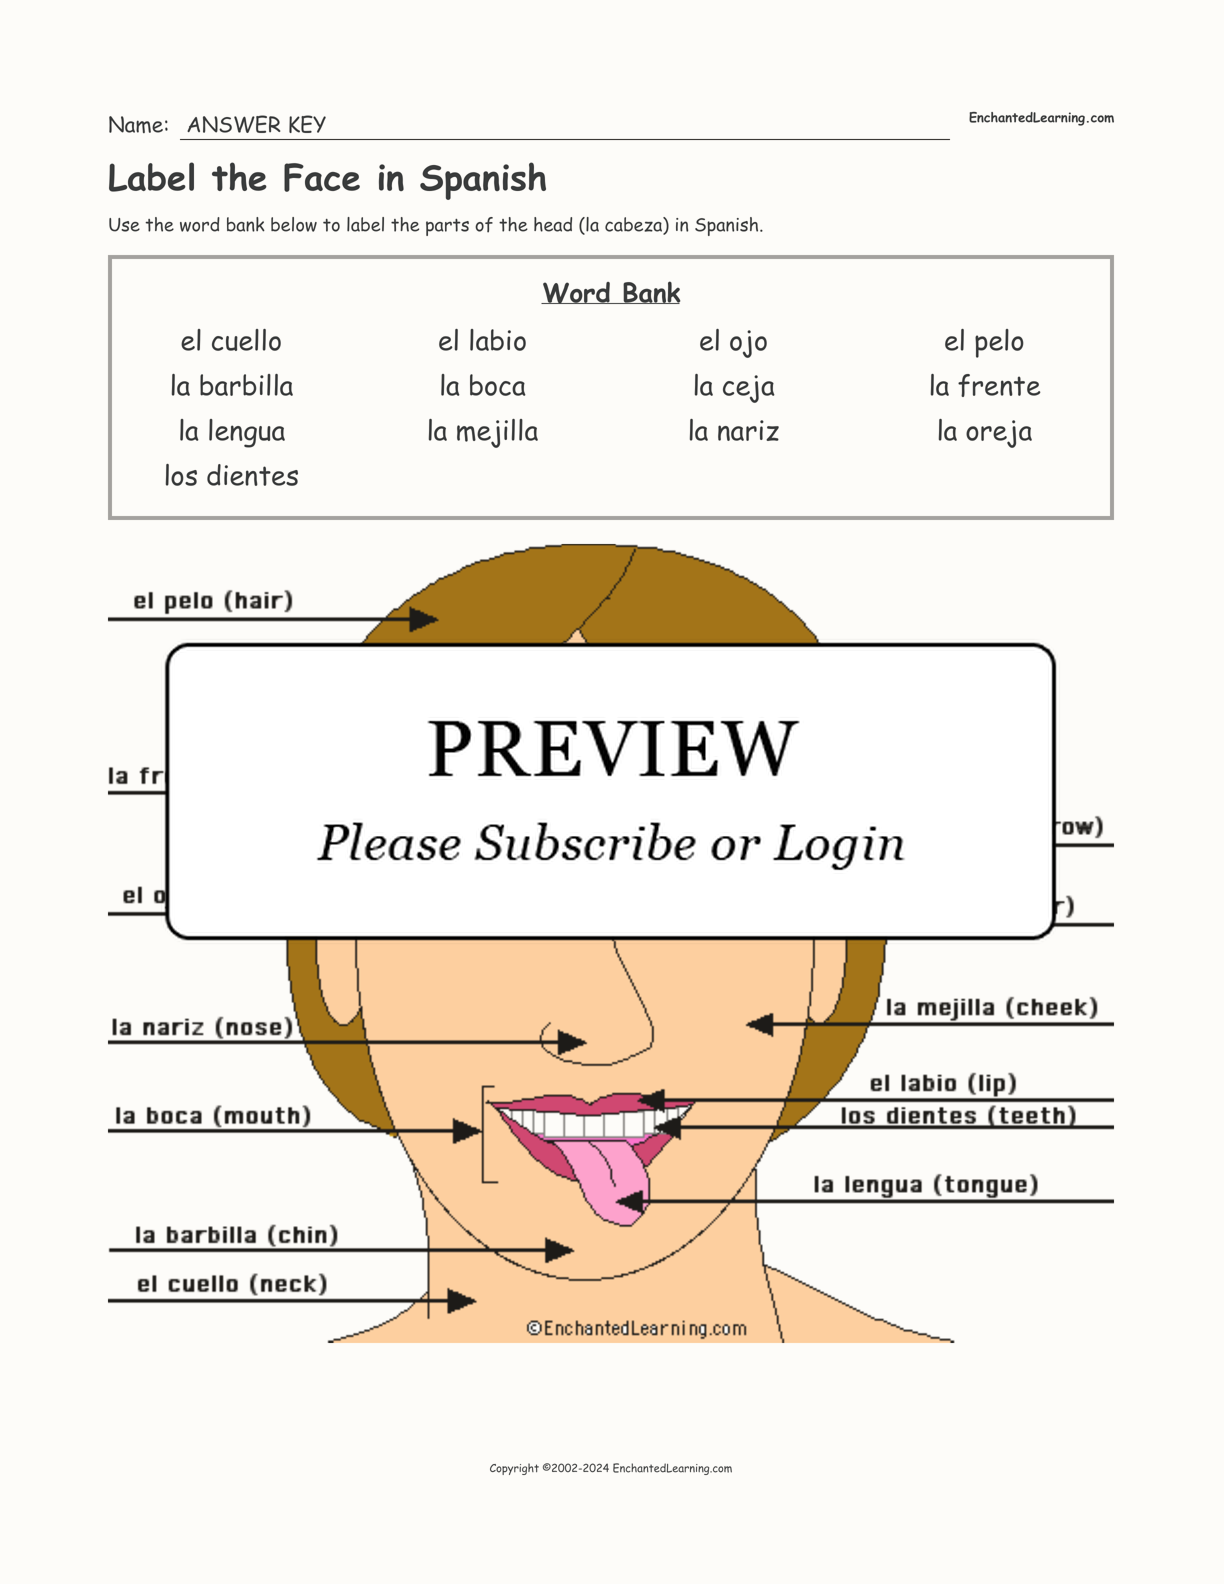 Label the Face in Spanish interactive worksheet page 2